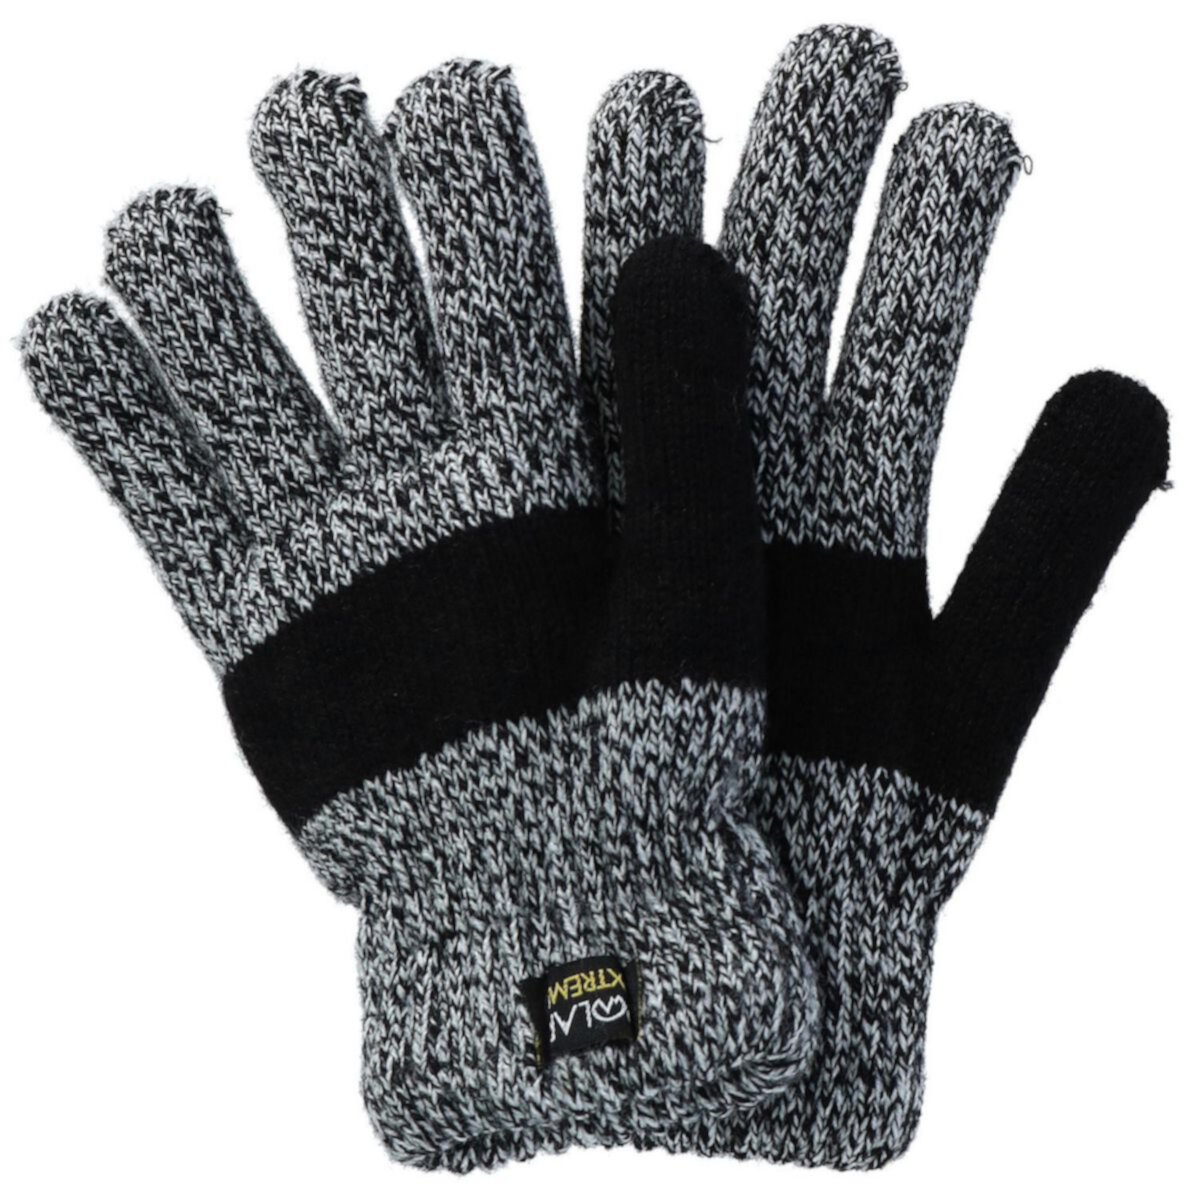 Women's Insulated Marl Knit Gloves Polar Extreme